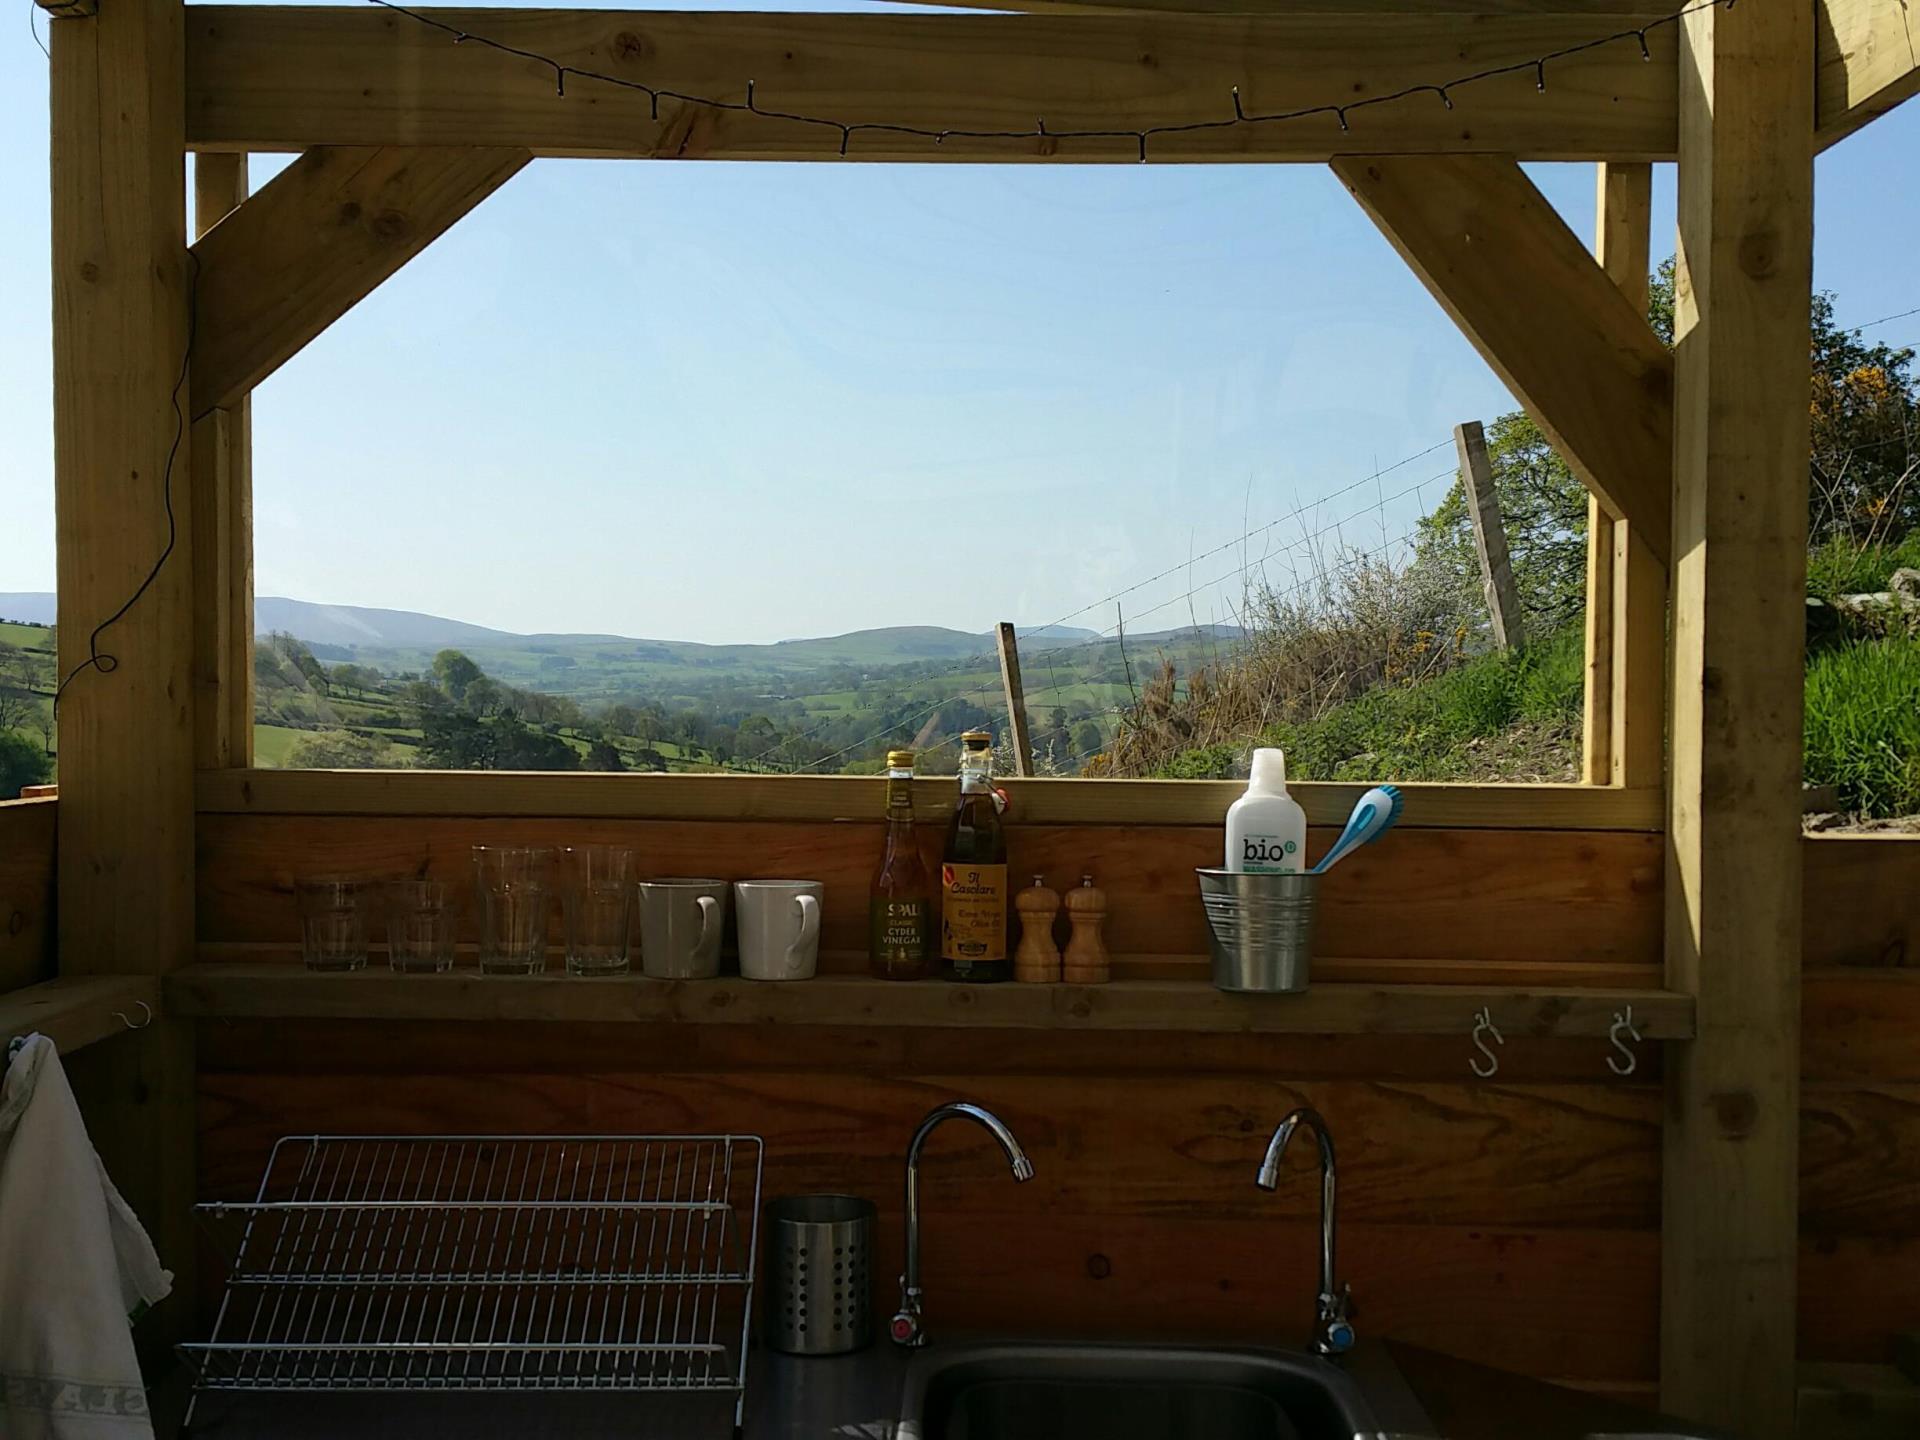 Owl outdoor kitchen - washing up with a view!